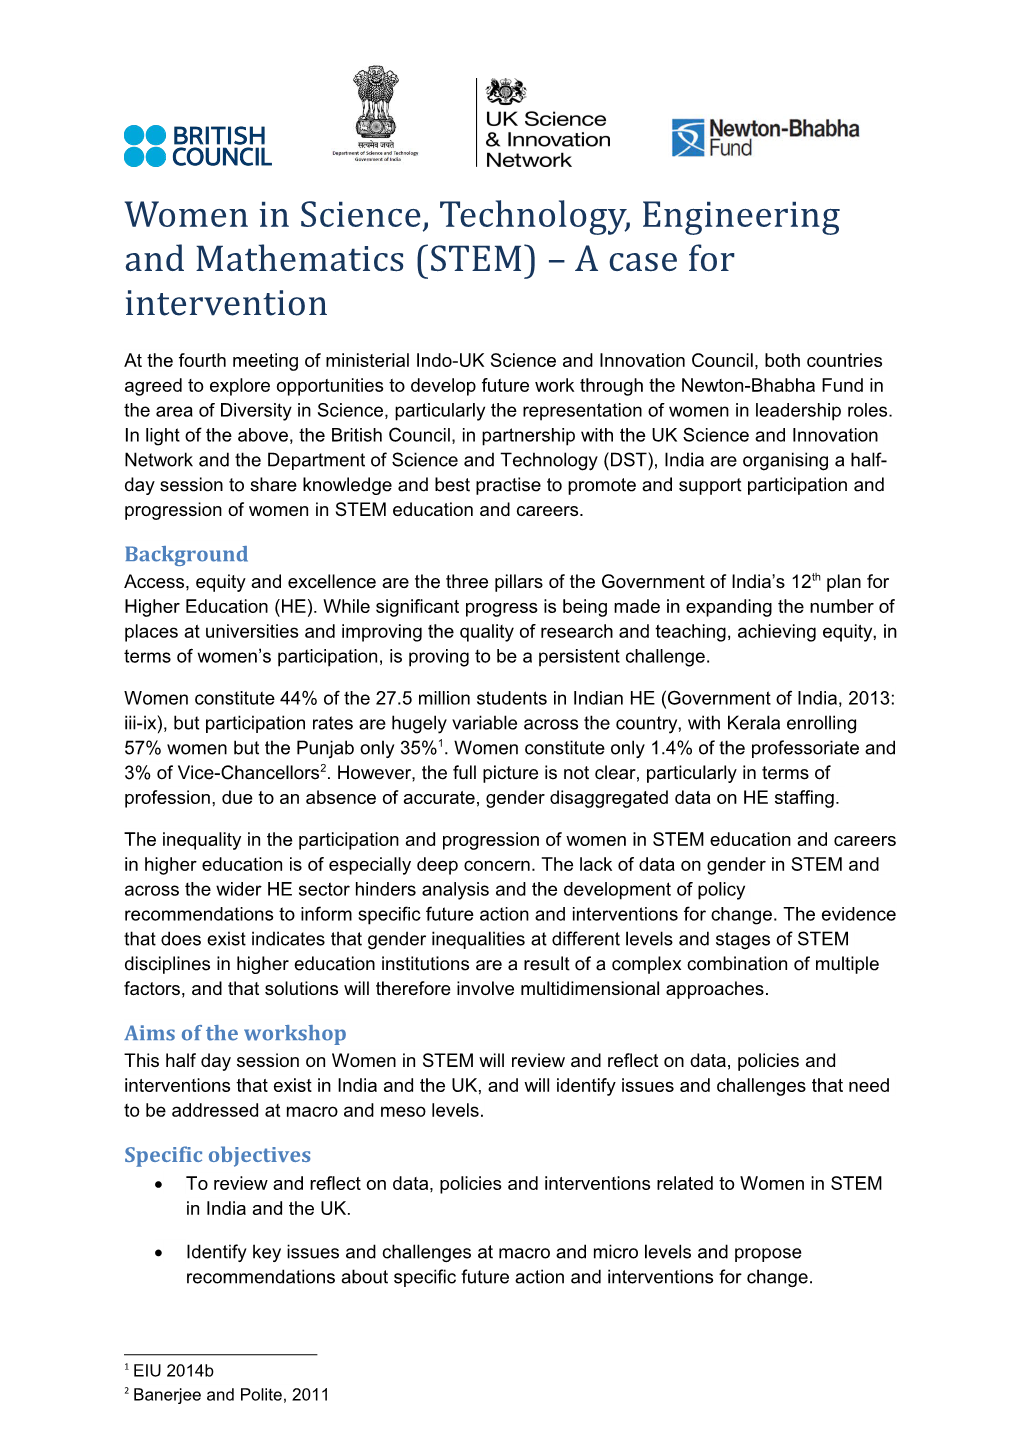 Women in Science, Technology, Engineering and Mathematics (STEM) a Case Forintervention